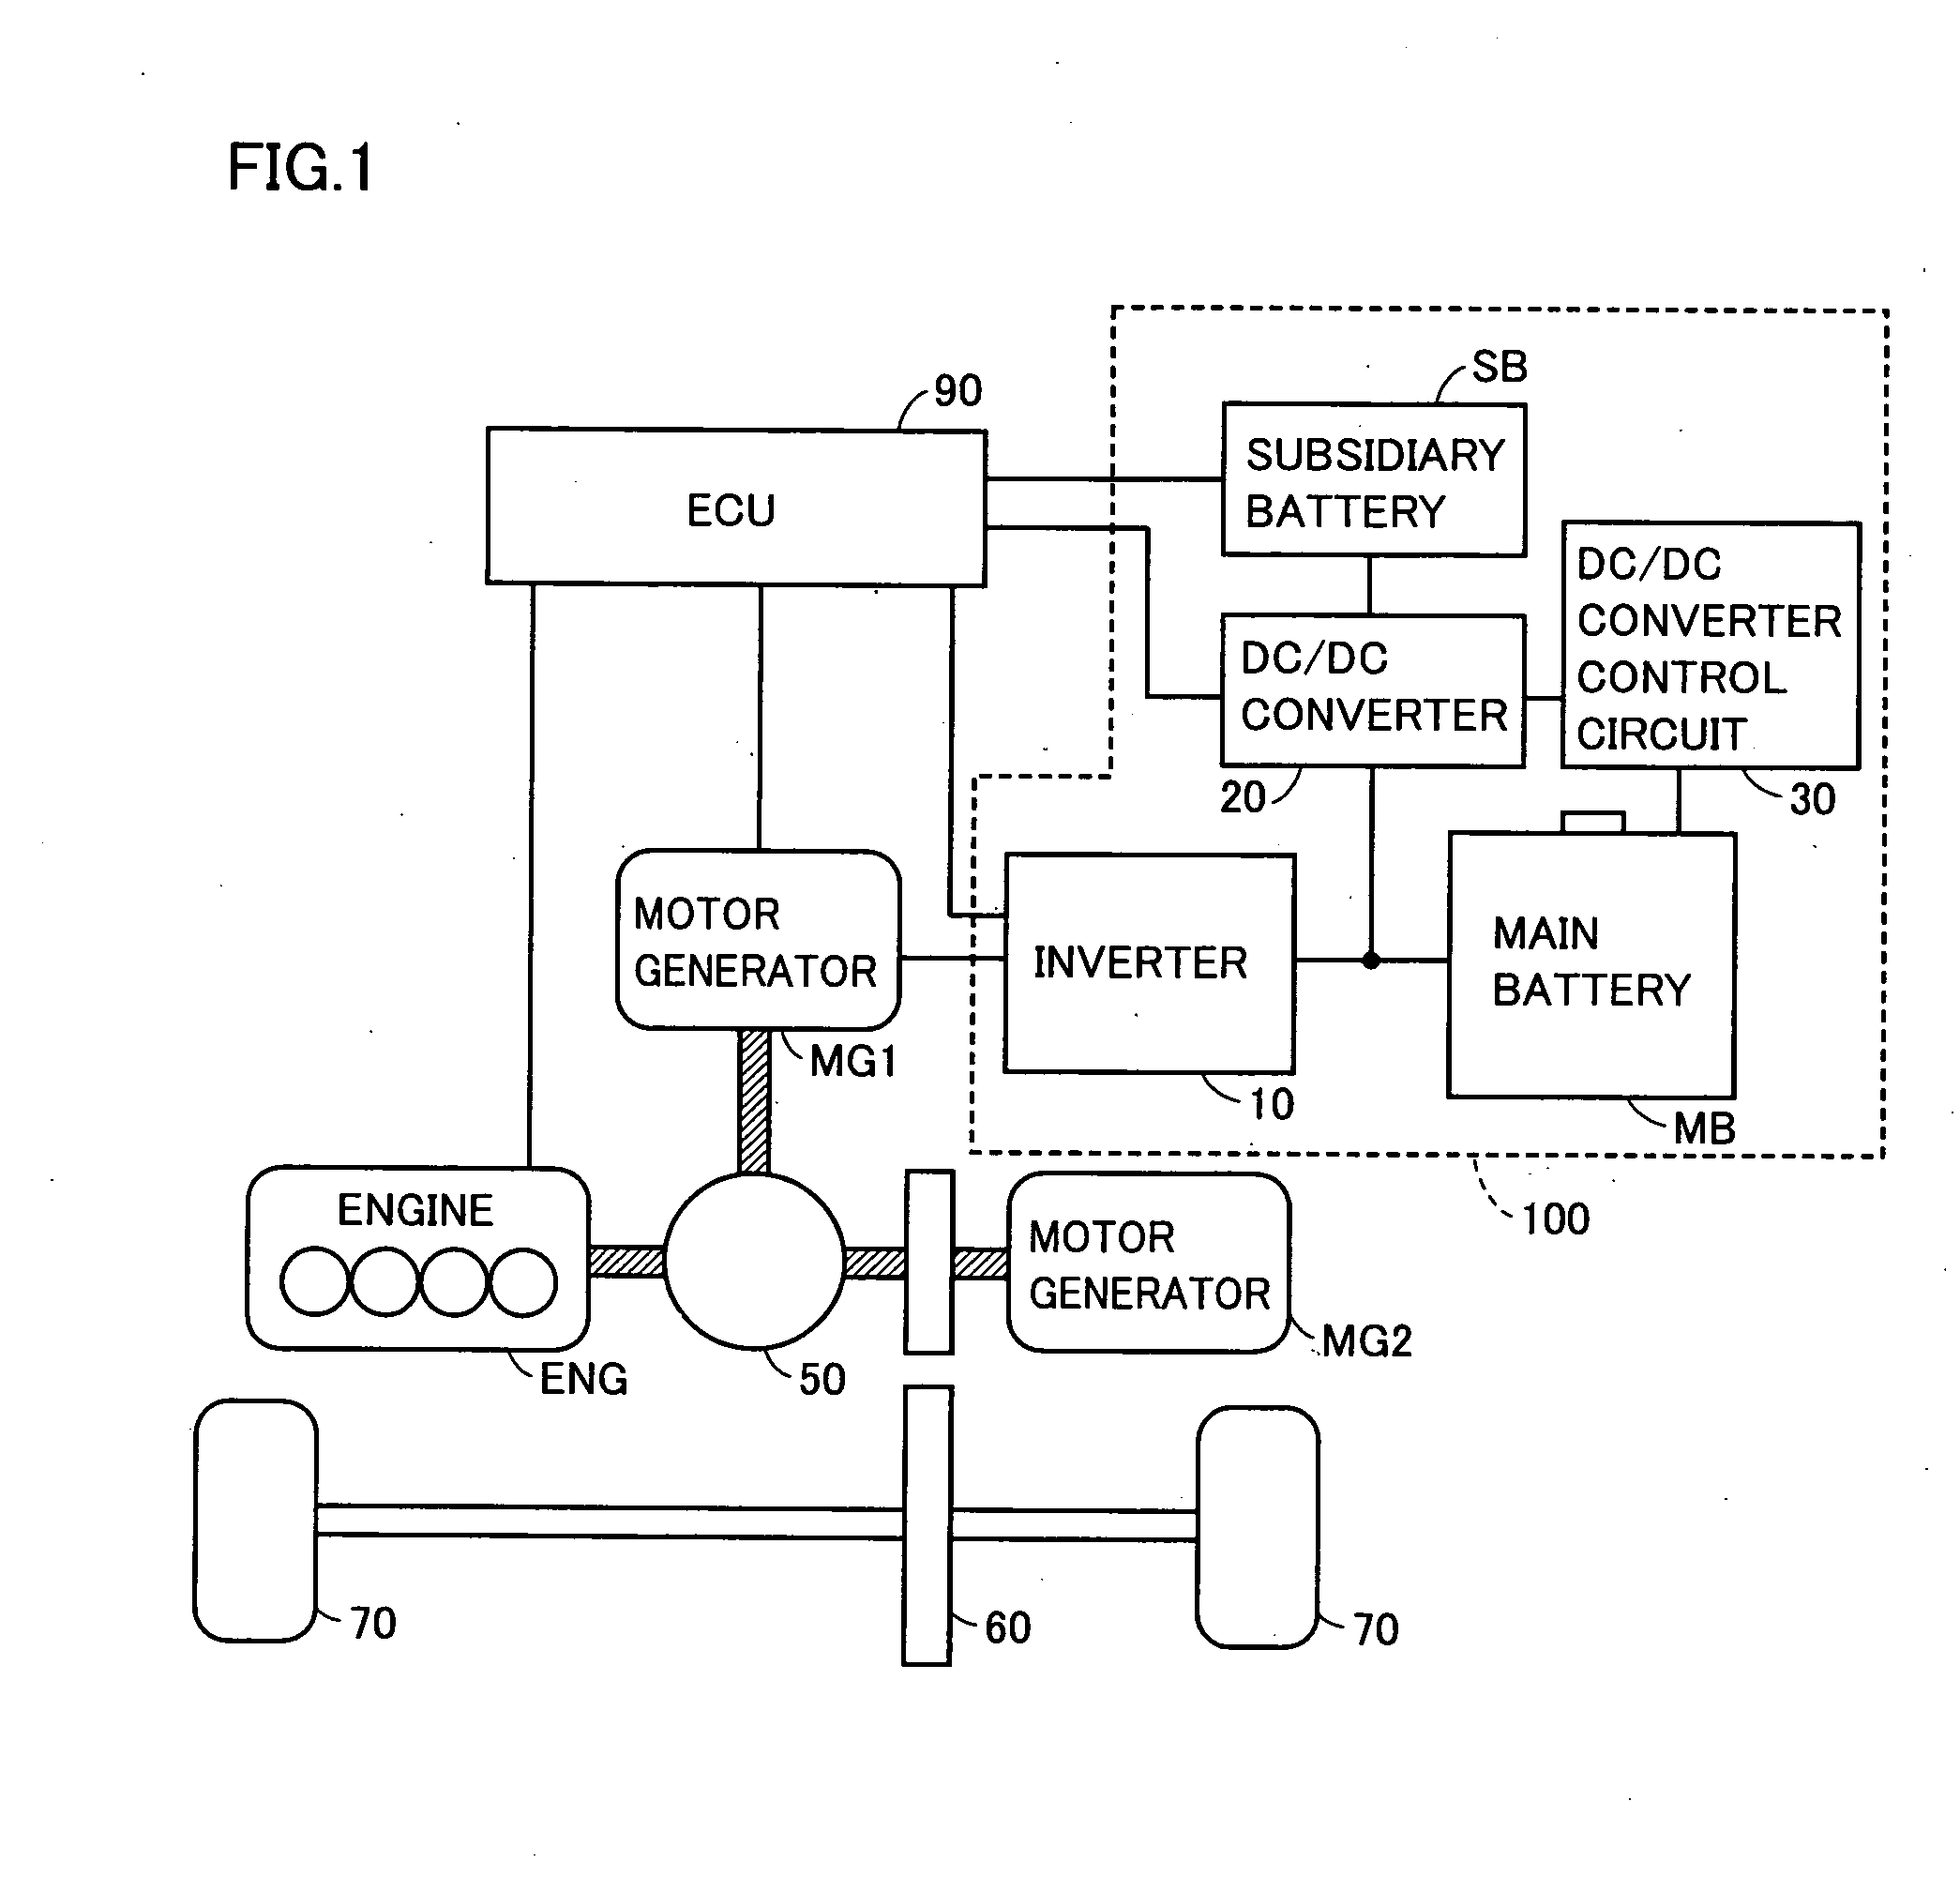 Motor Driving Apparatus Capable of Driving Motor with Reliability